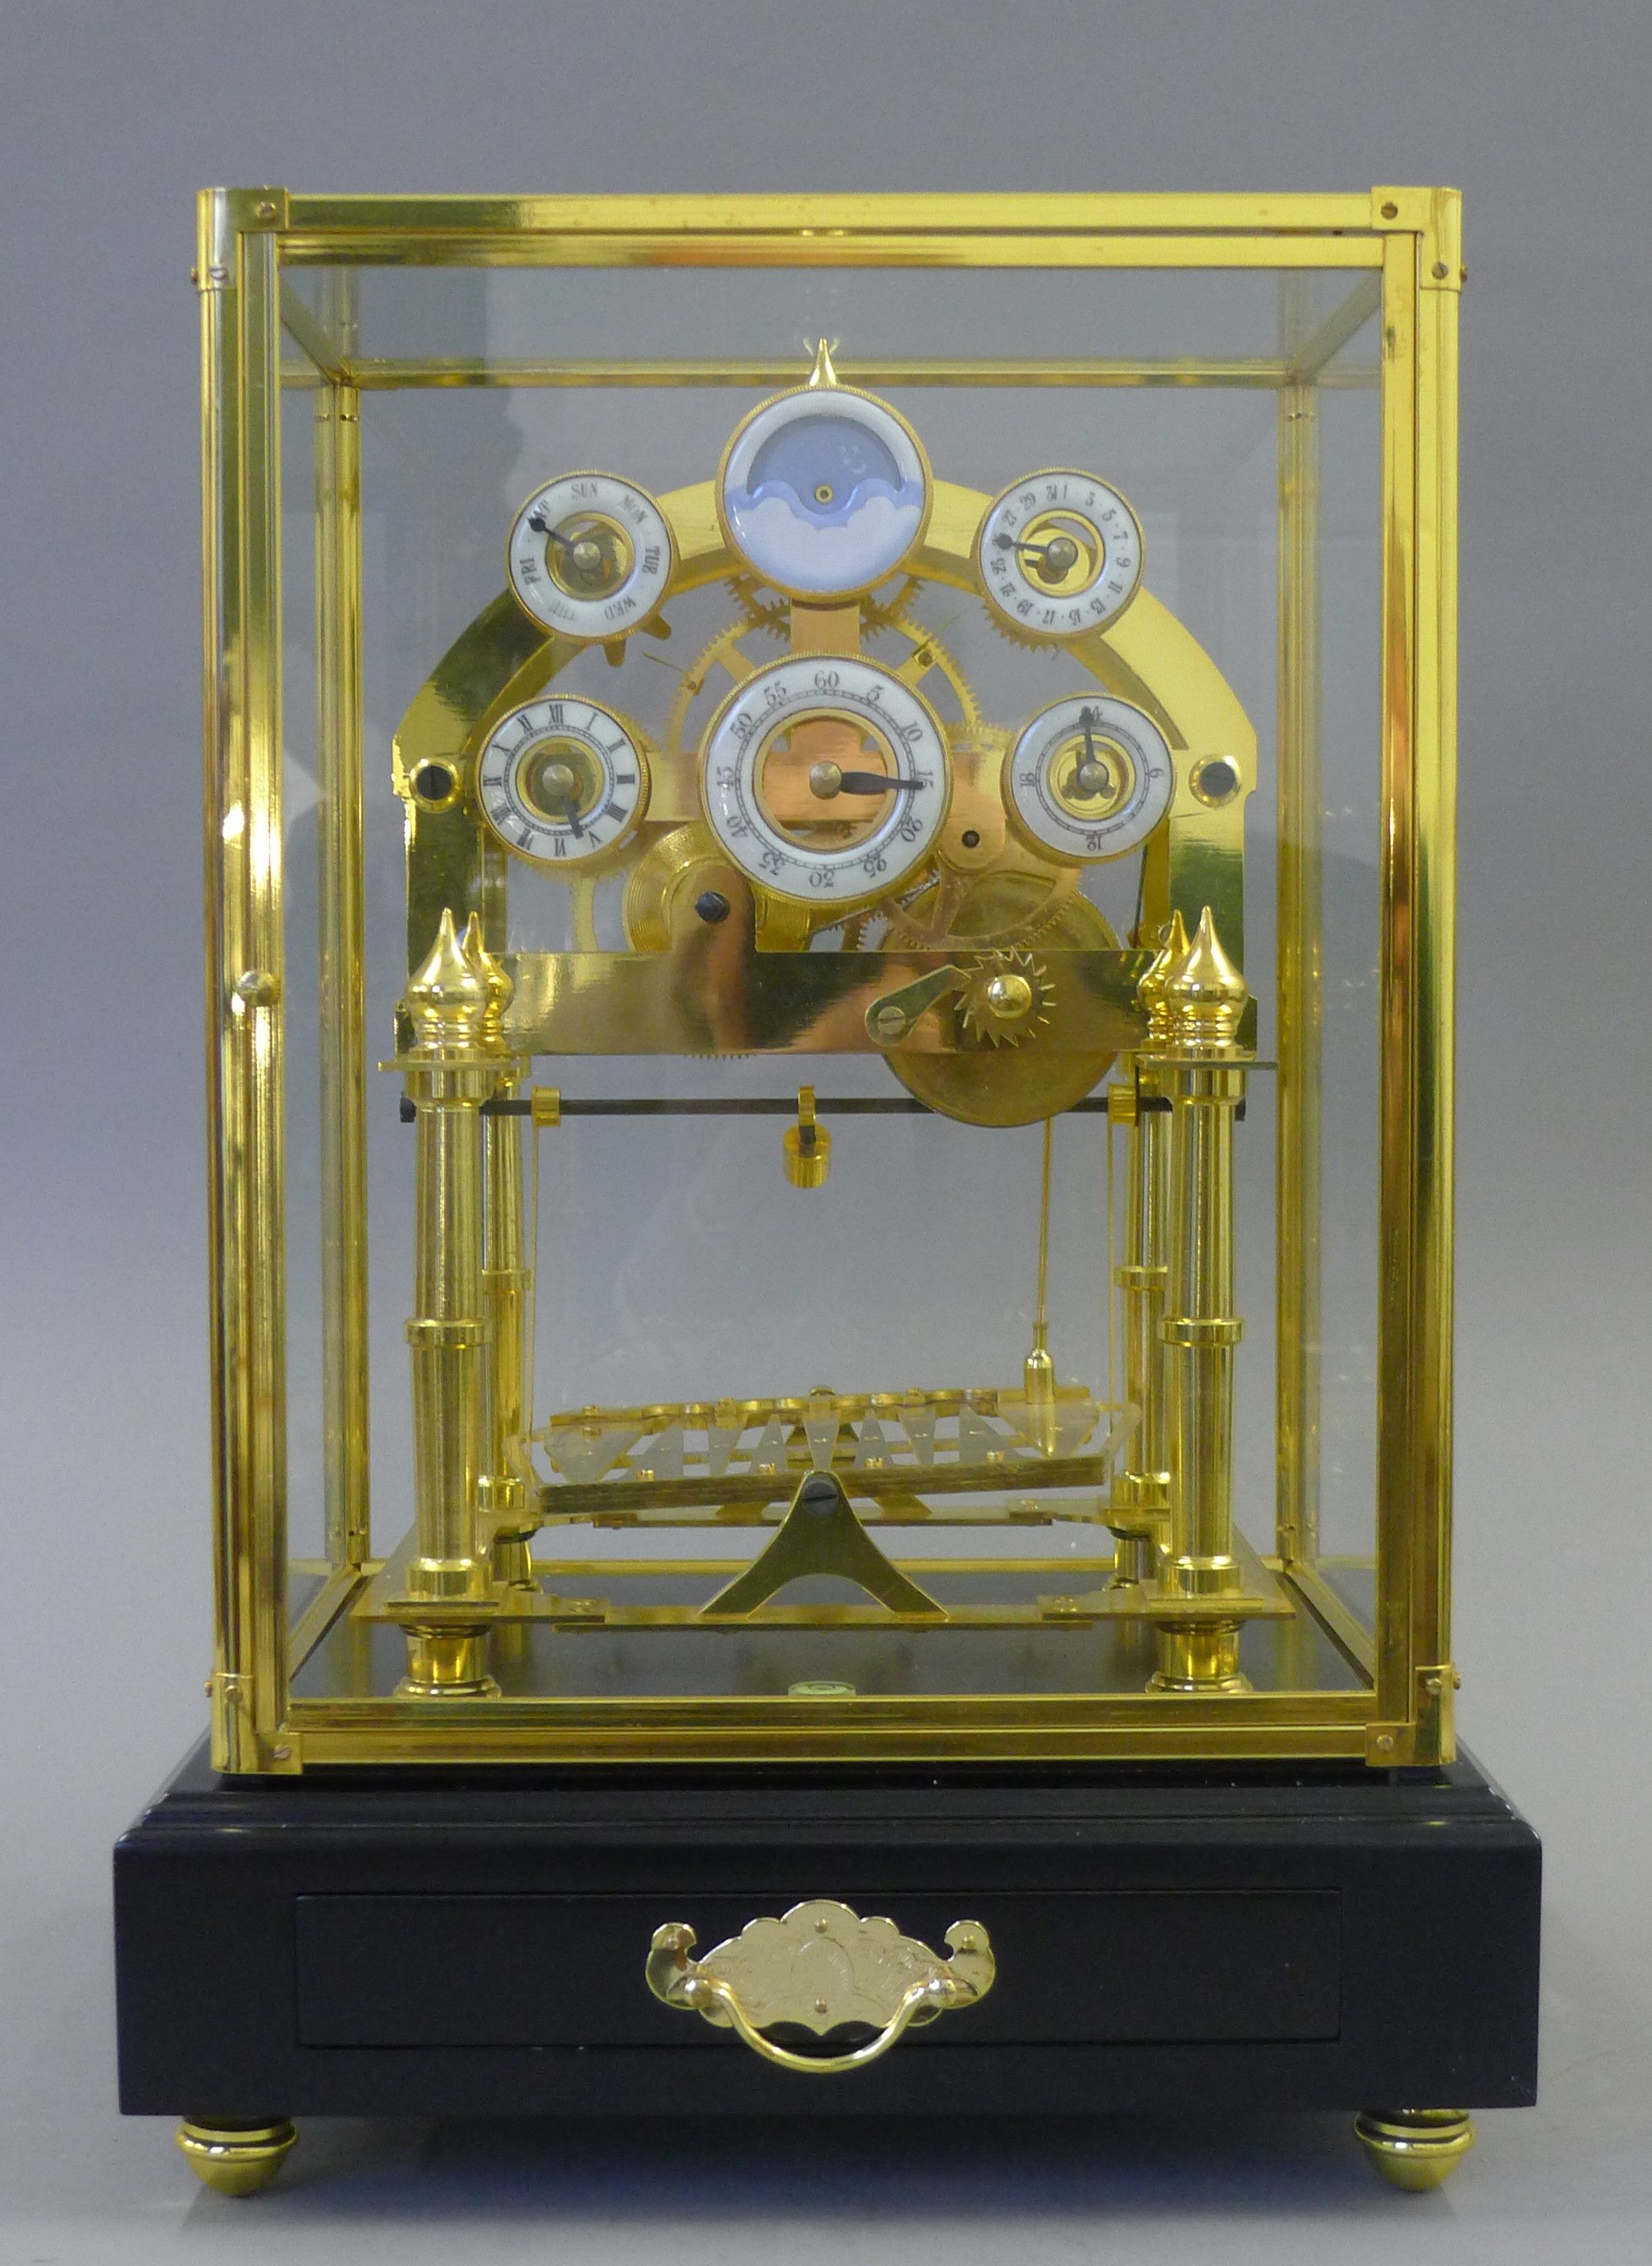 A moon phase congreave clock. 43 cm high.